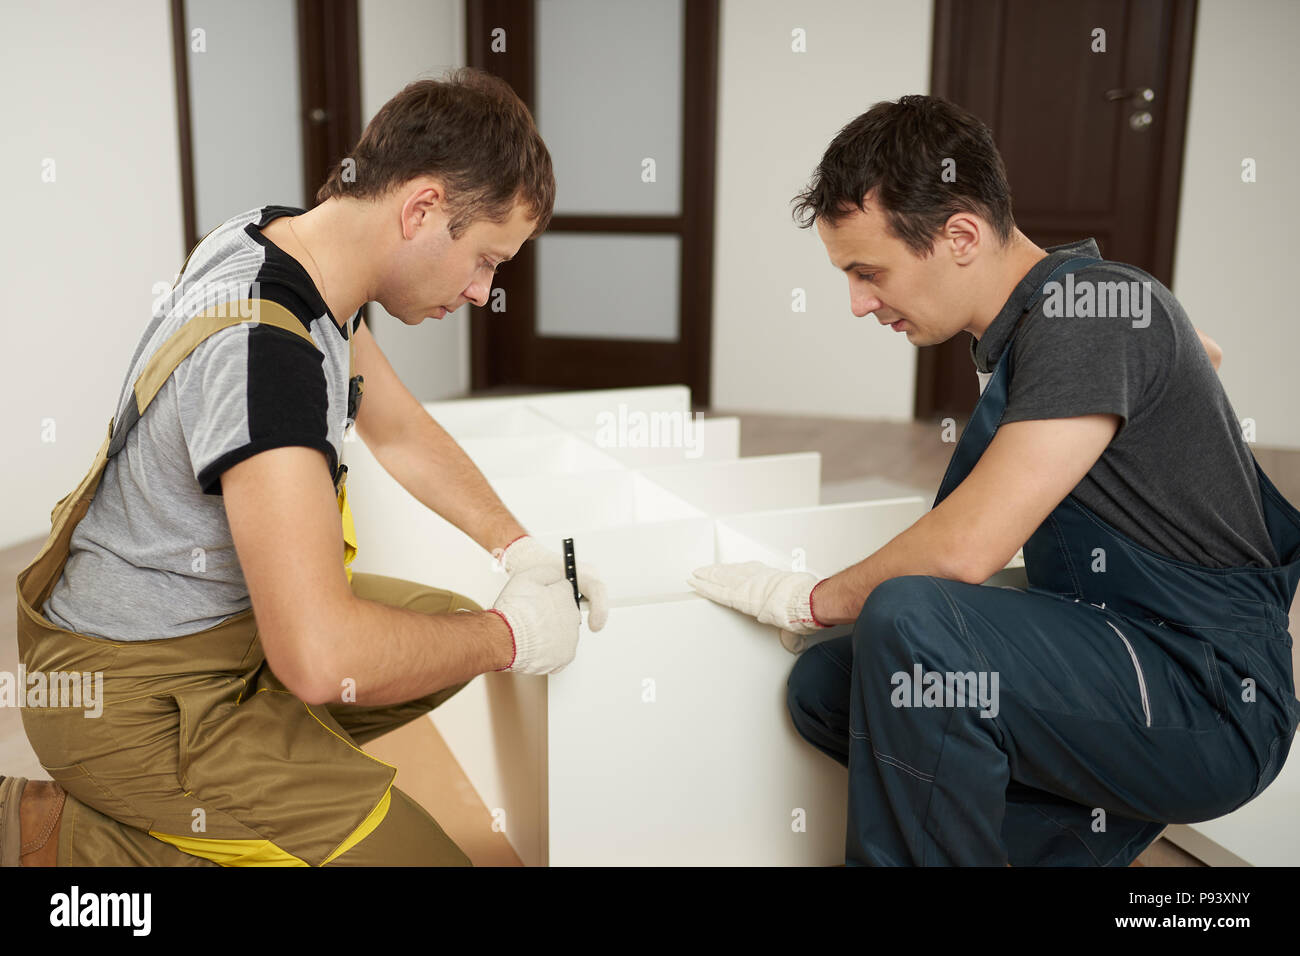 Service of assembly furniture. Two carpenters work on assemble wardrobe Stock Photo